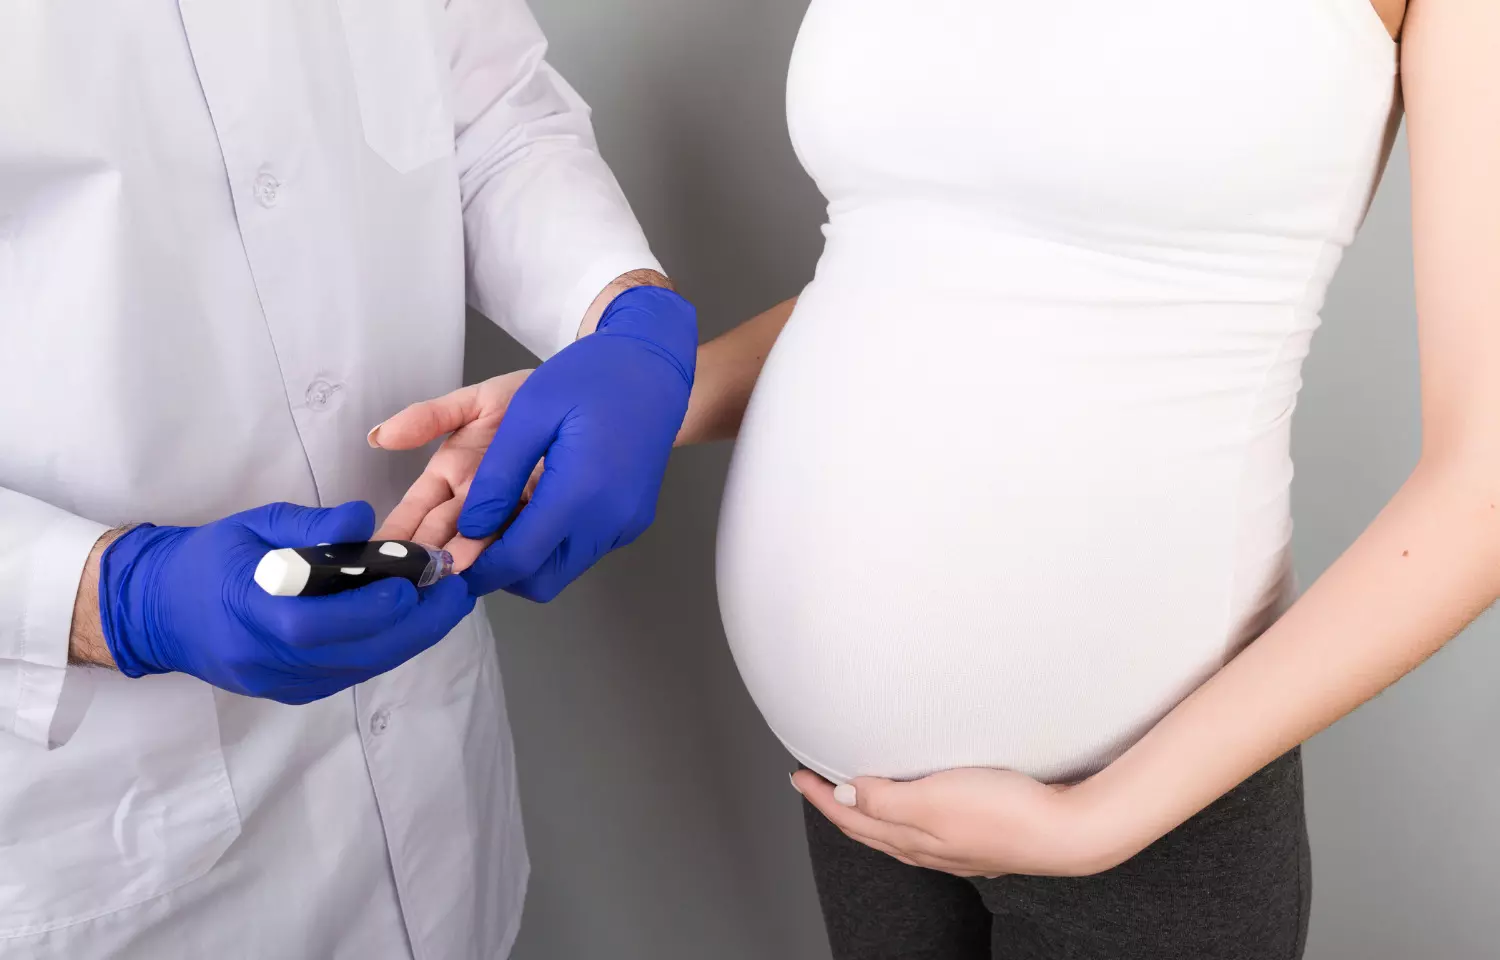 Gestational diabetes tied to caesarean delivery and excessive birth weight in infants: BMJ